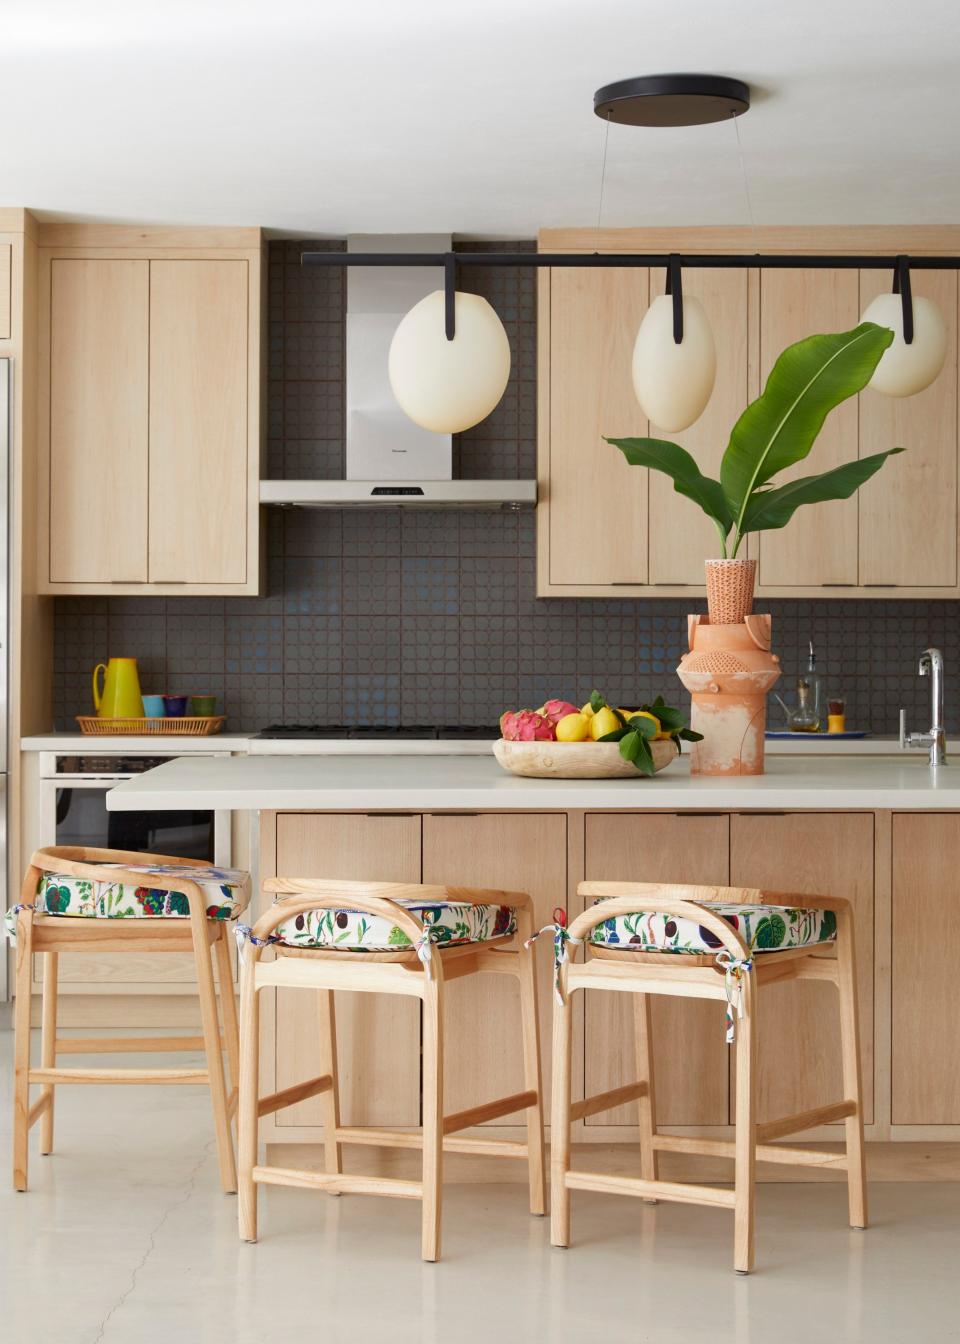 The kitchen is outfitted with white oak cabinets, Hansgrohe fixtures, and a Thermador stovetop and hood. A Rich Brilliant Willing light hangs above the concrete island surrounded by Meru counter stools from The Citizenry that have been covered in Josef Frank’s Italian Dinner fabric.